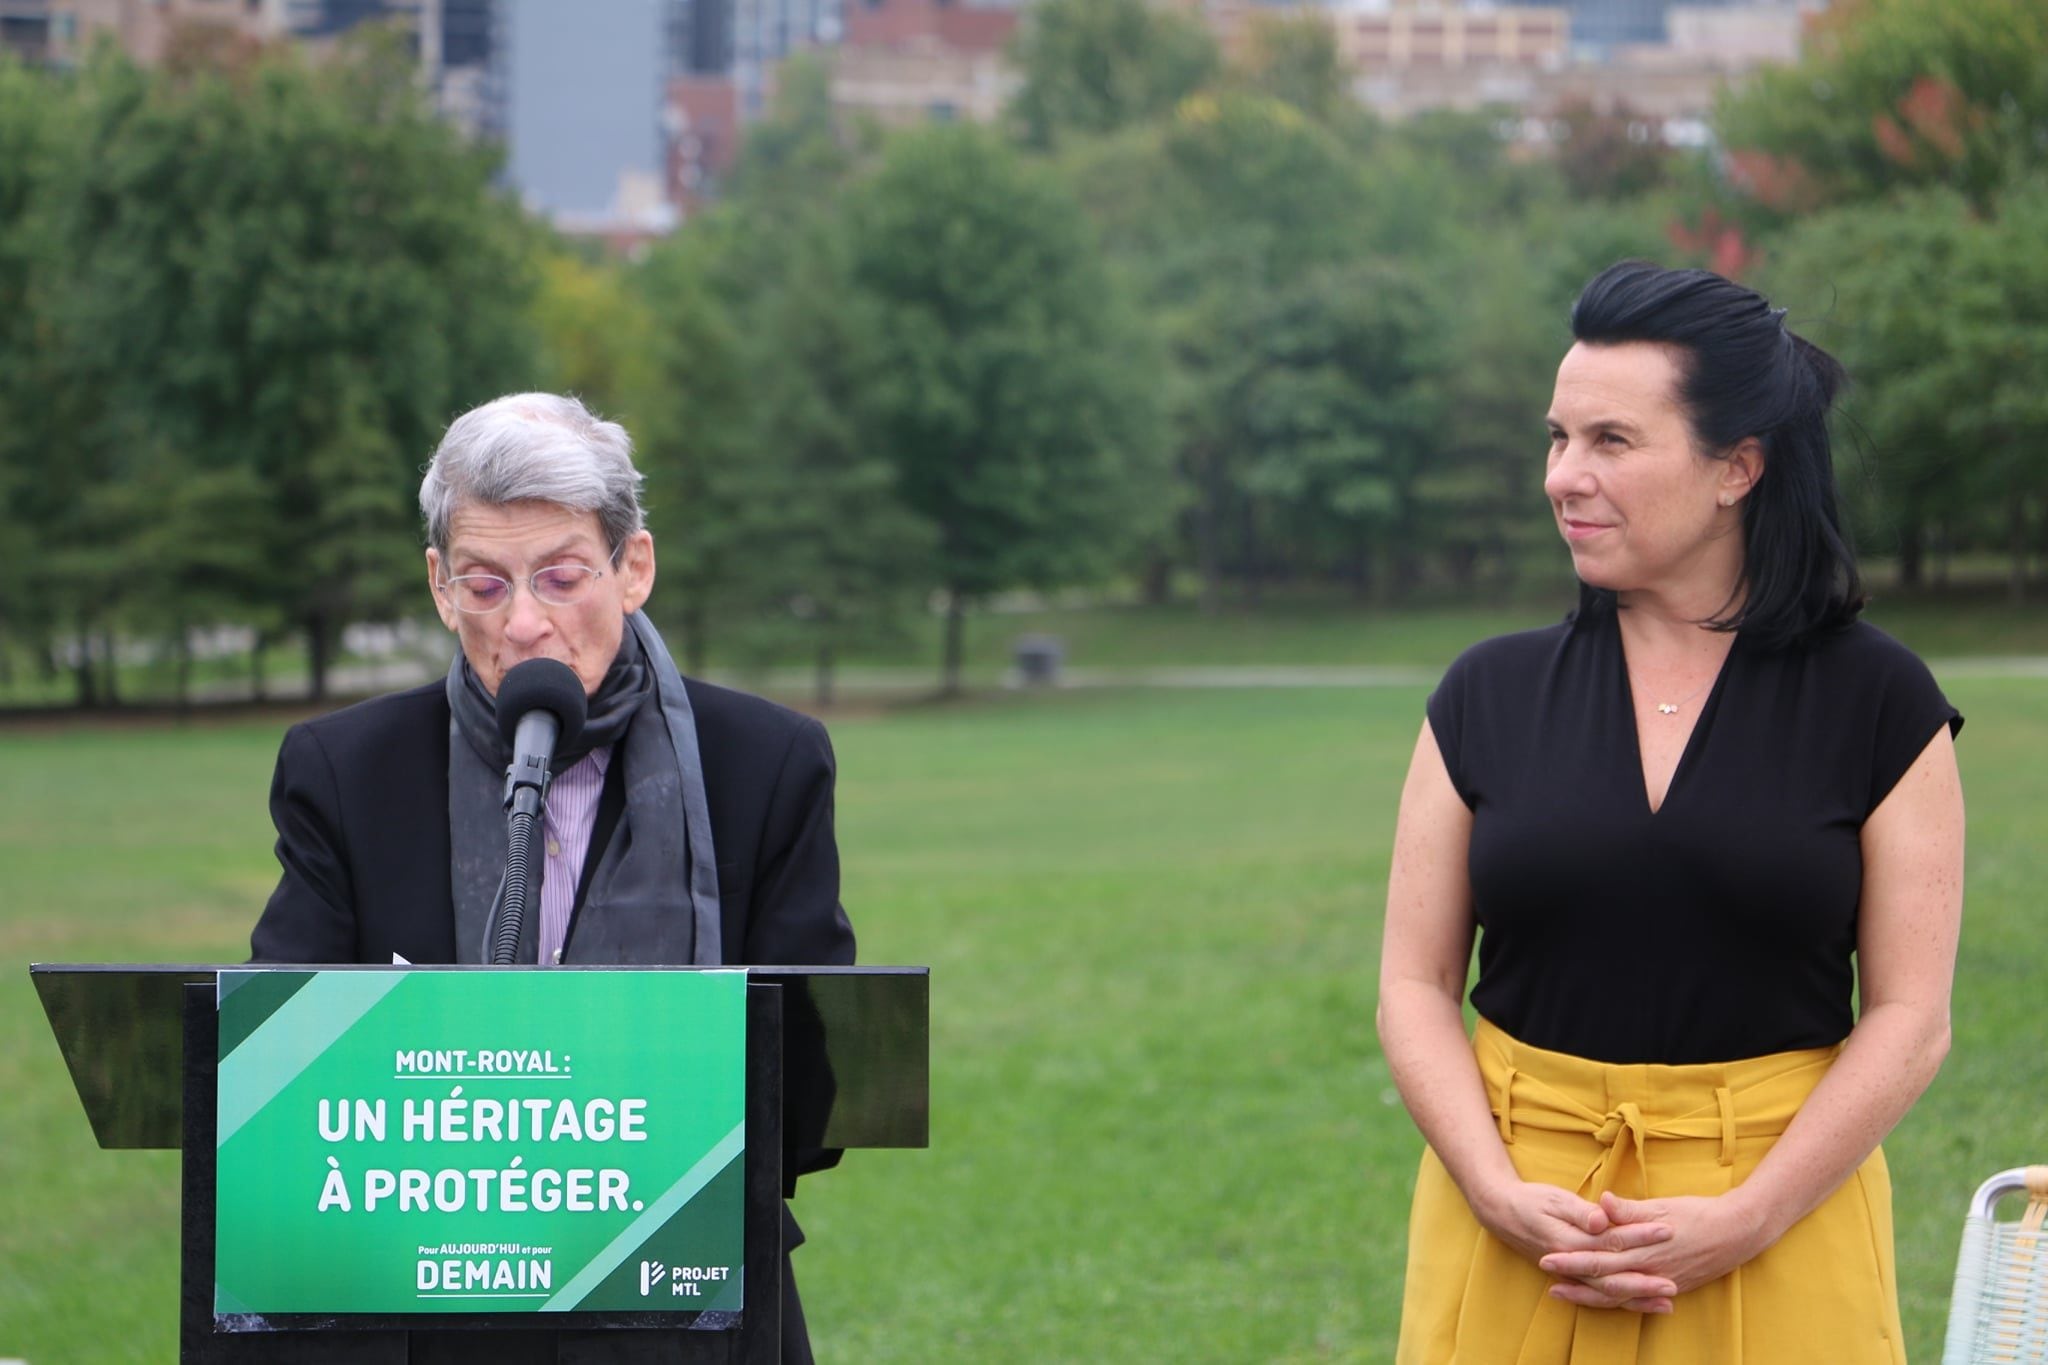 Projet Montréal is committed to protecting the views of Mount Royal and the city's UNESCO status